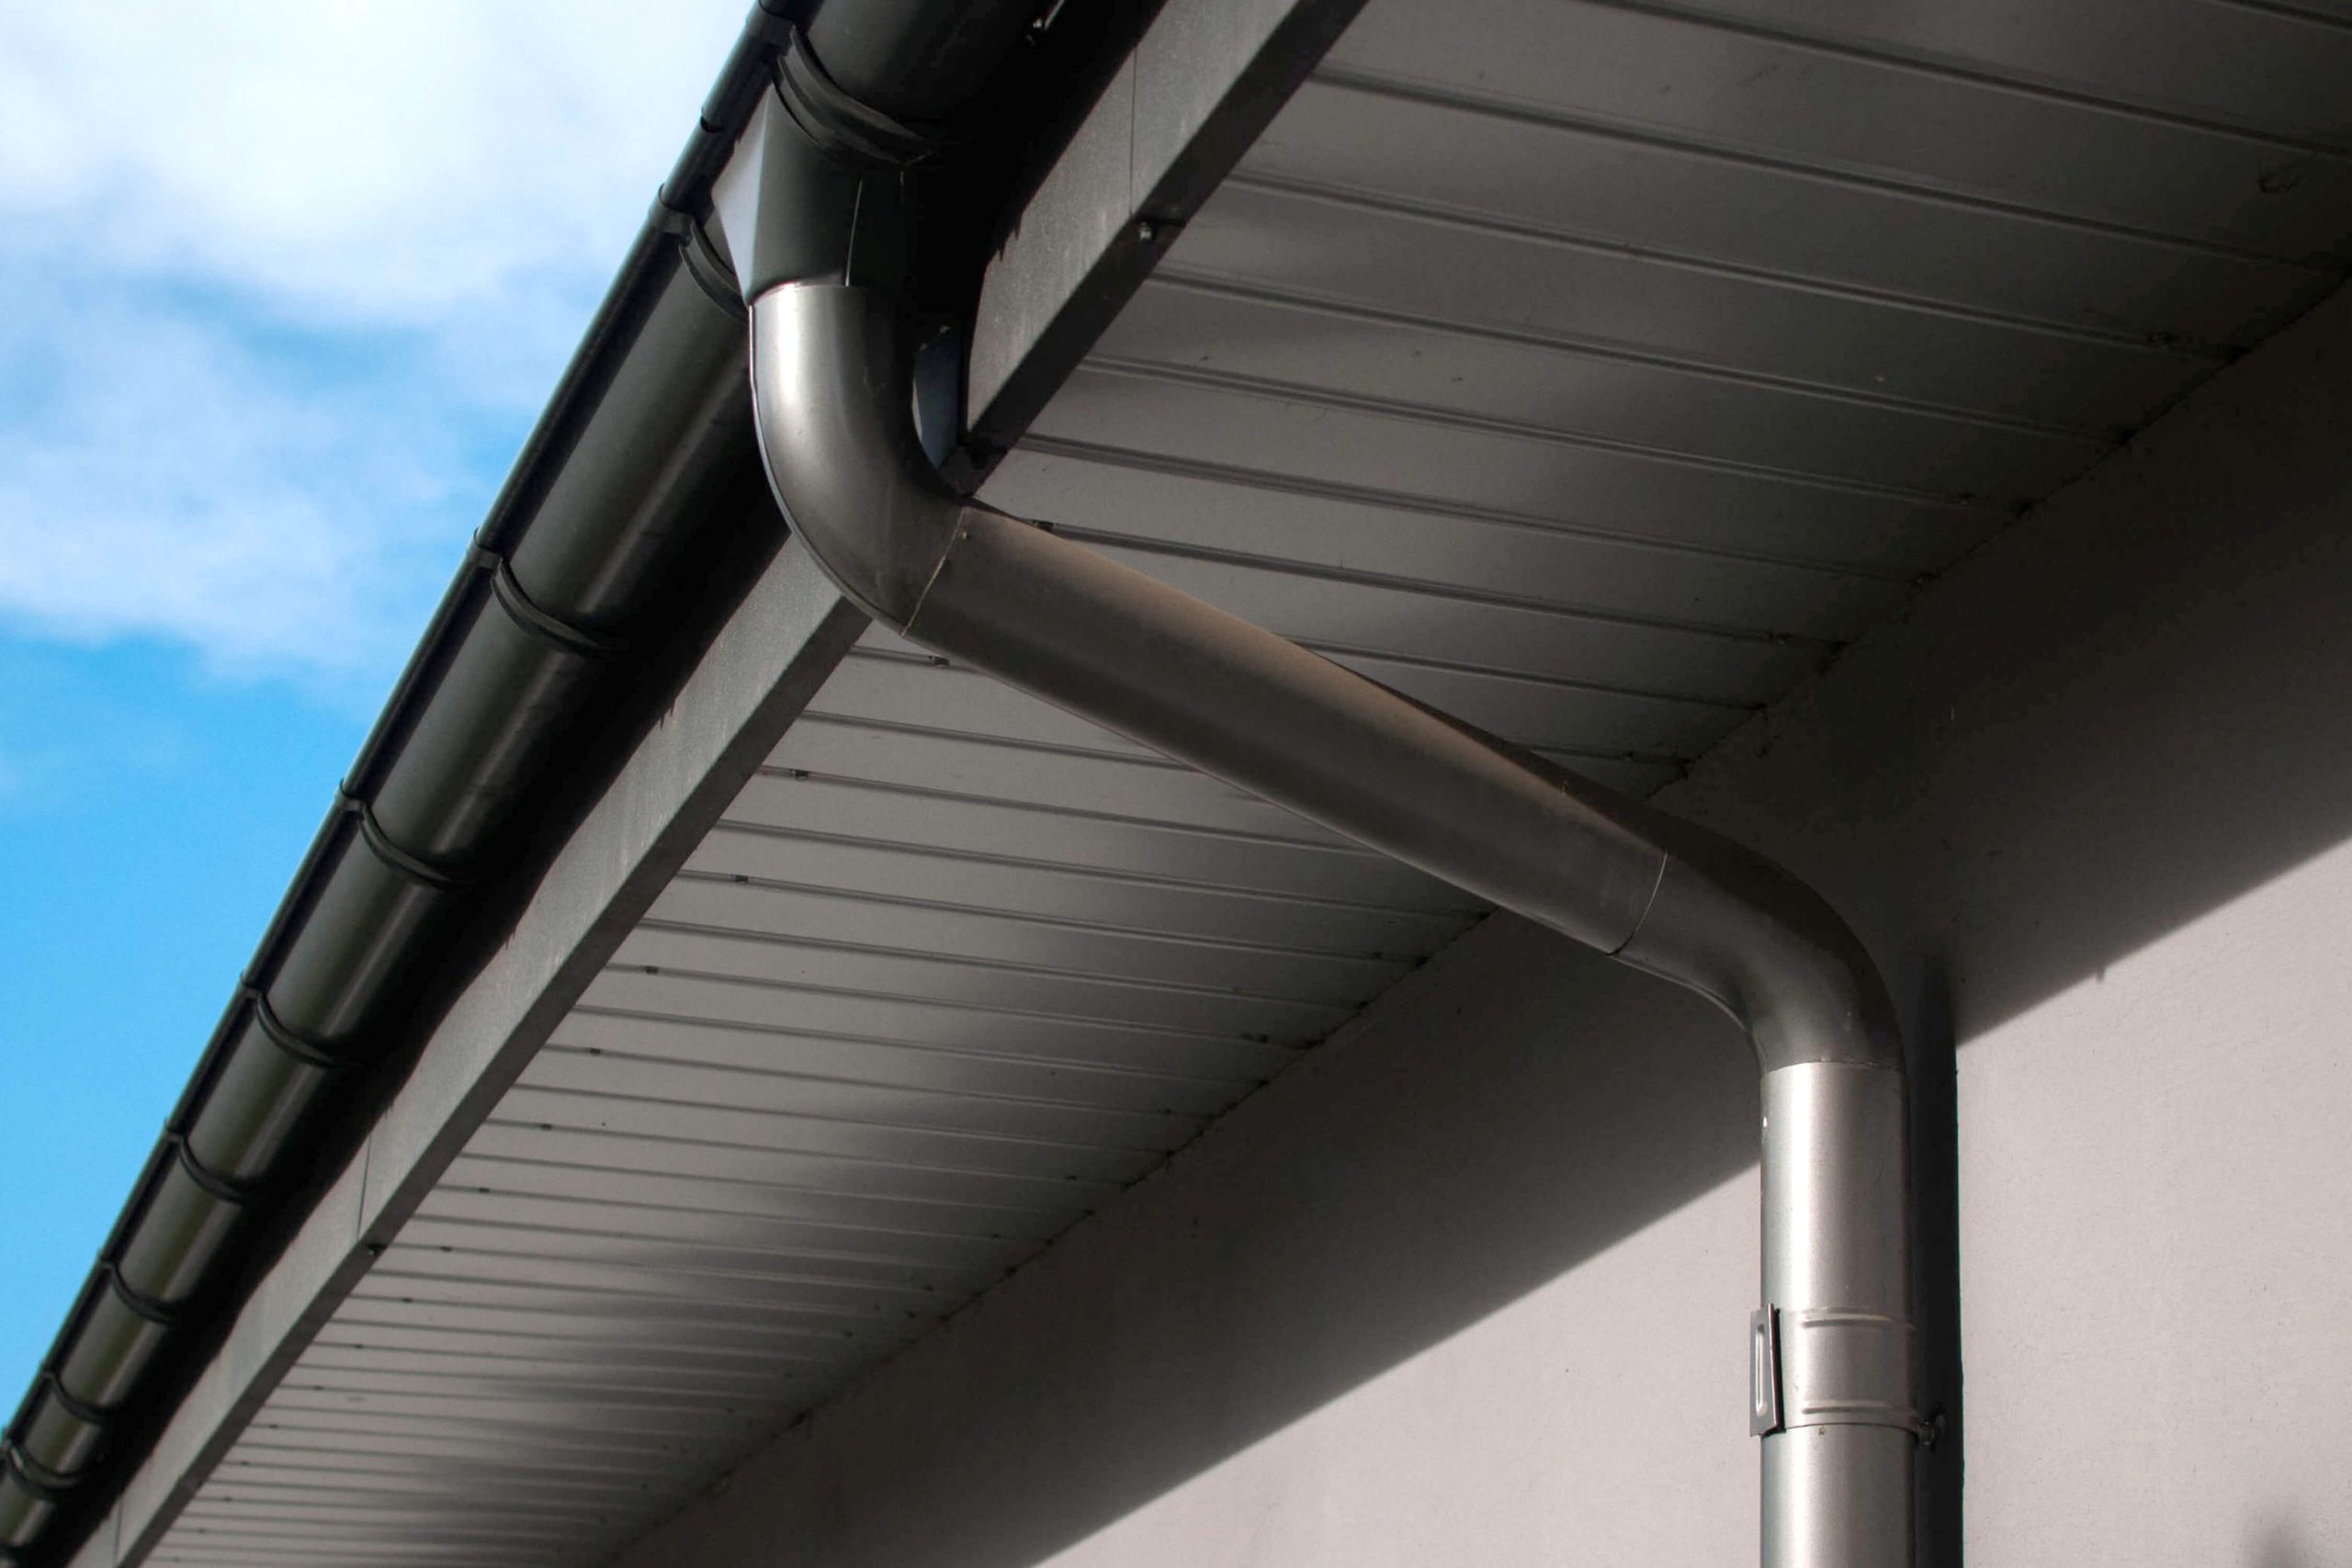 Corrosion-resistant galvanized gutters installed on a commercial building in New Braunfels